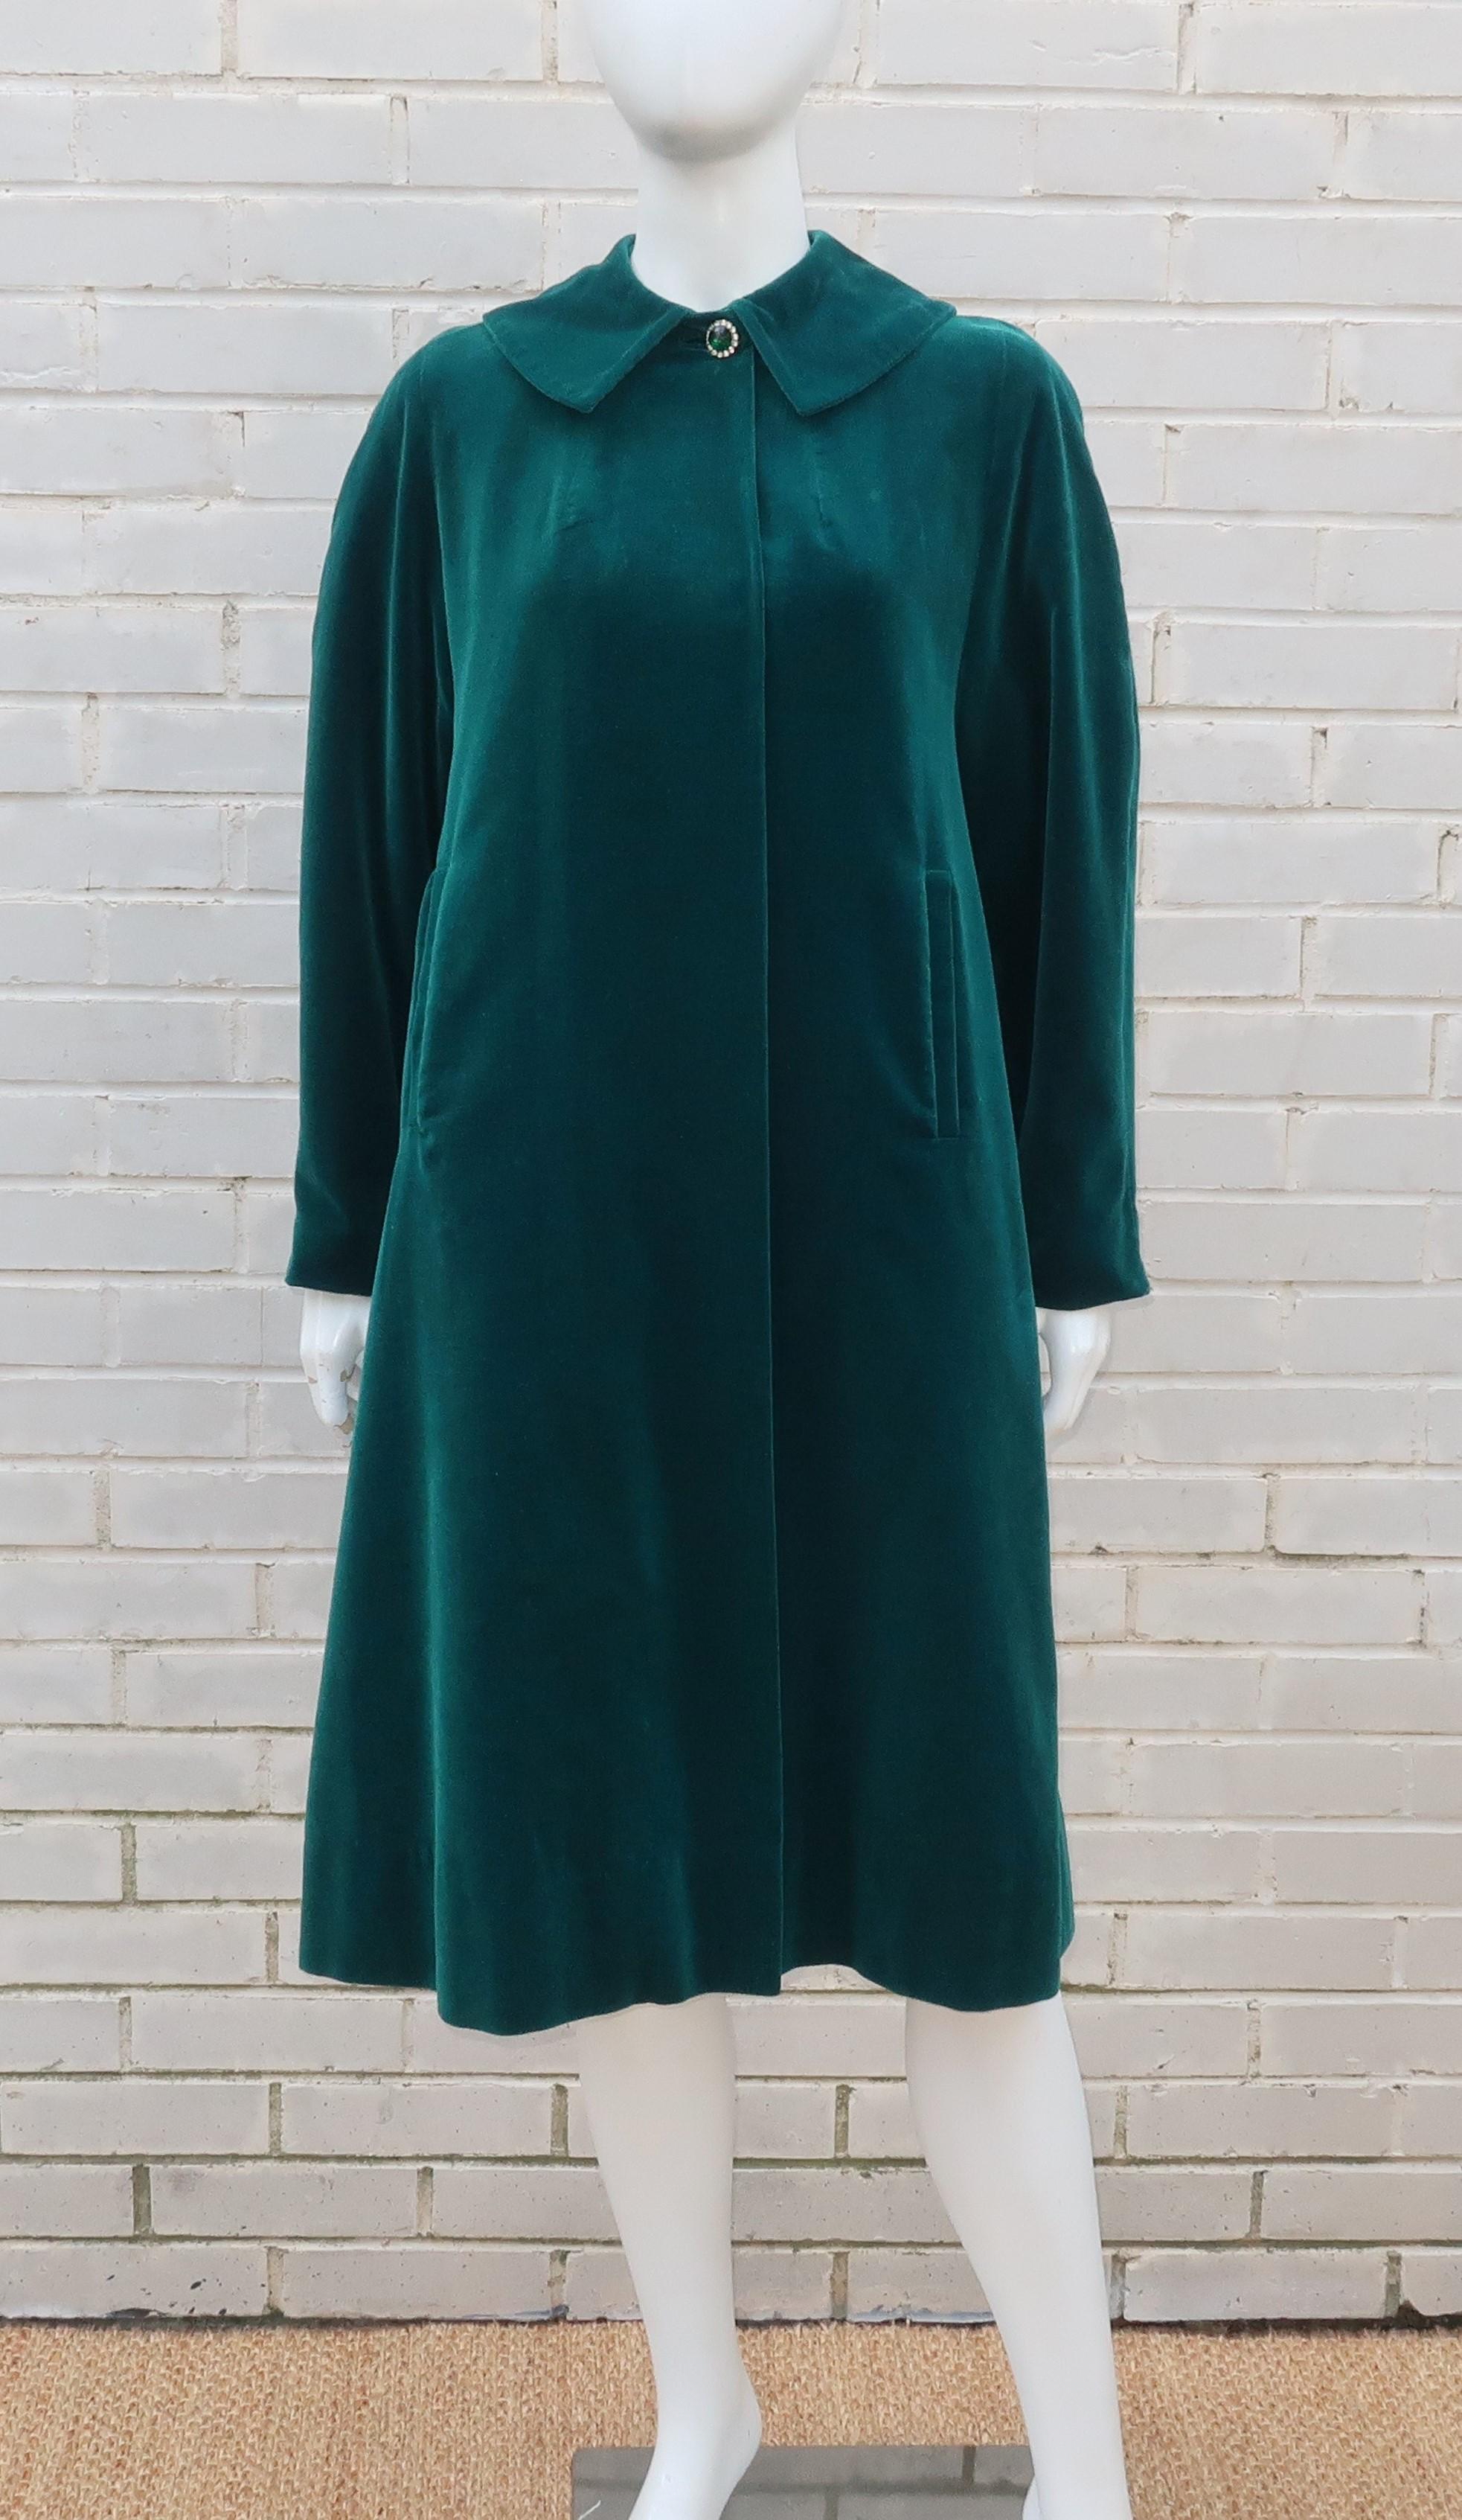 In the 1950’s, this emerald green (with the slightest hint of blue) velvet coat would have been a warm accessory to evening wear but fast forward to a modern wardrobe and picture pairing it with tweeds and woolens for a lush touch.  The Italian